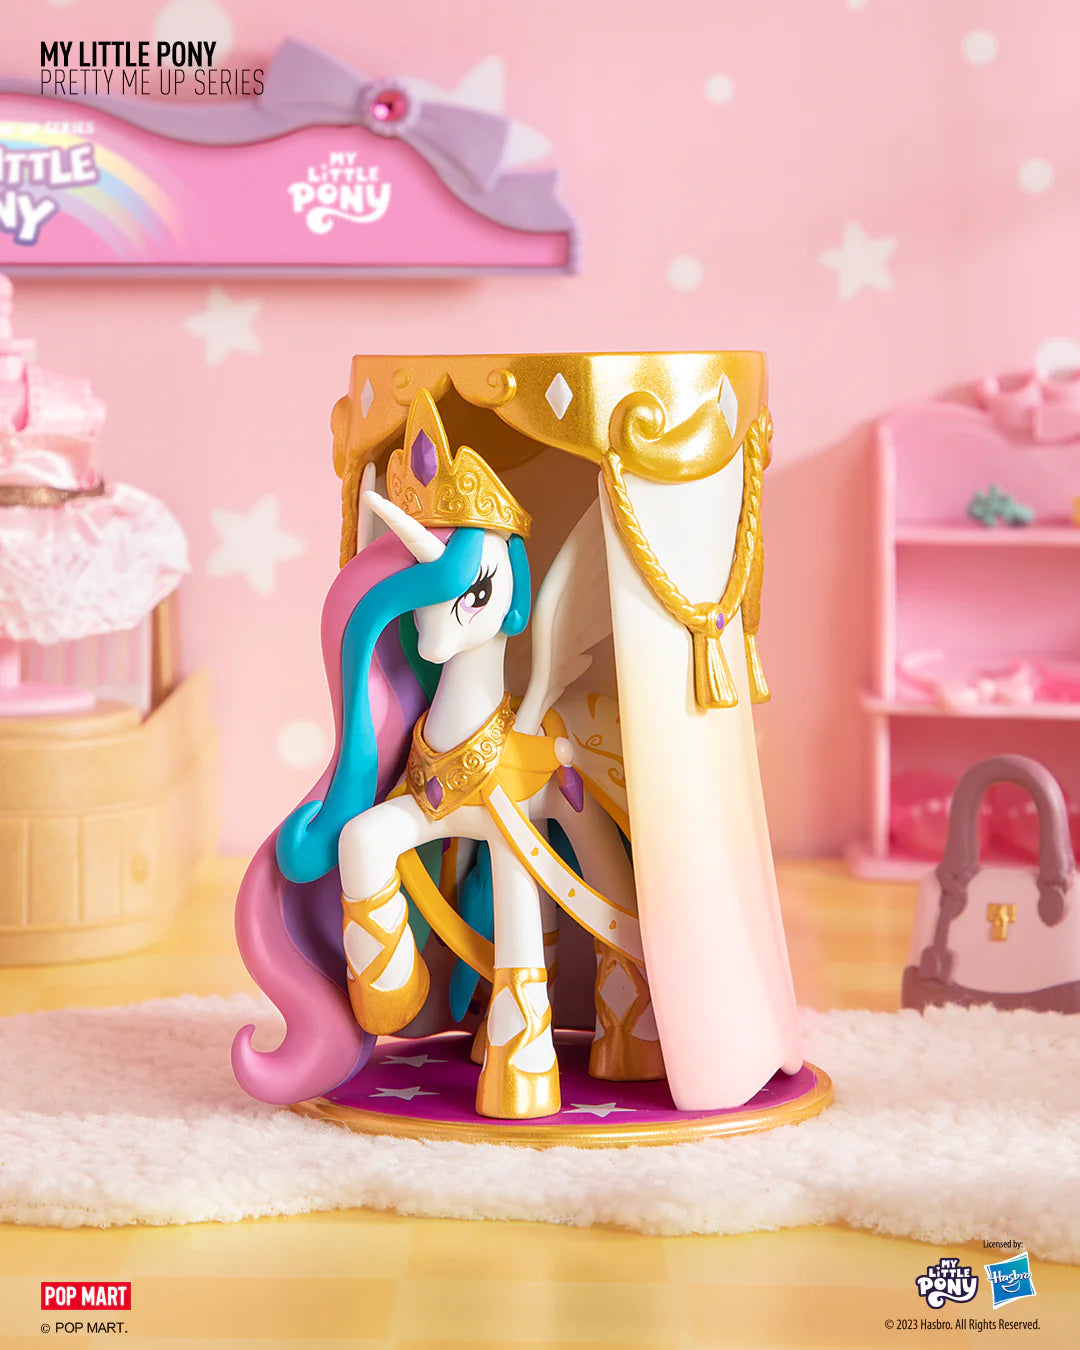 My Little Pony Pretty Me Up Blind Box Series